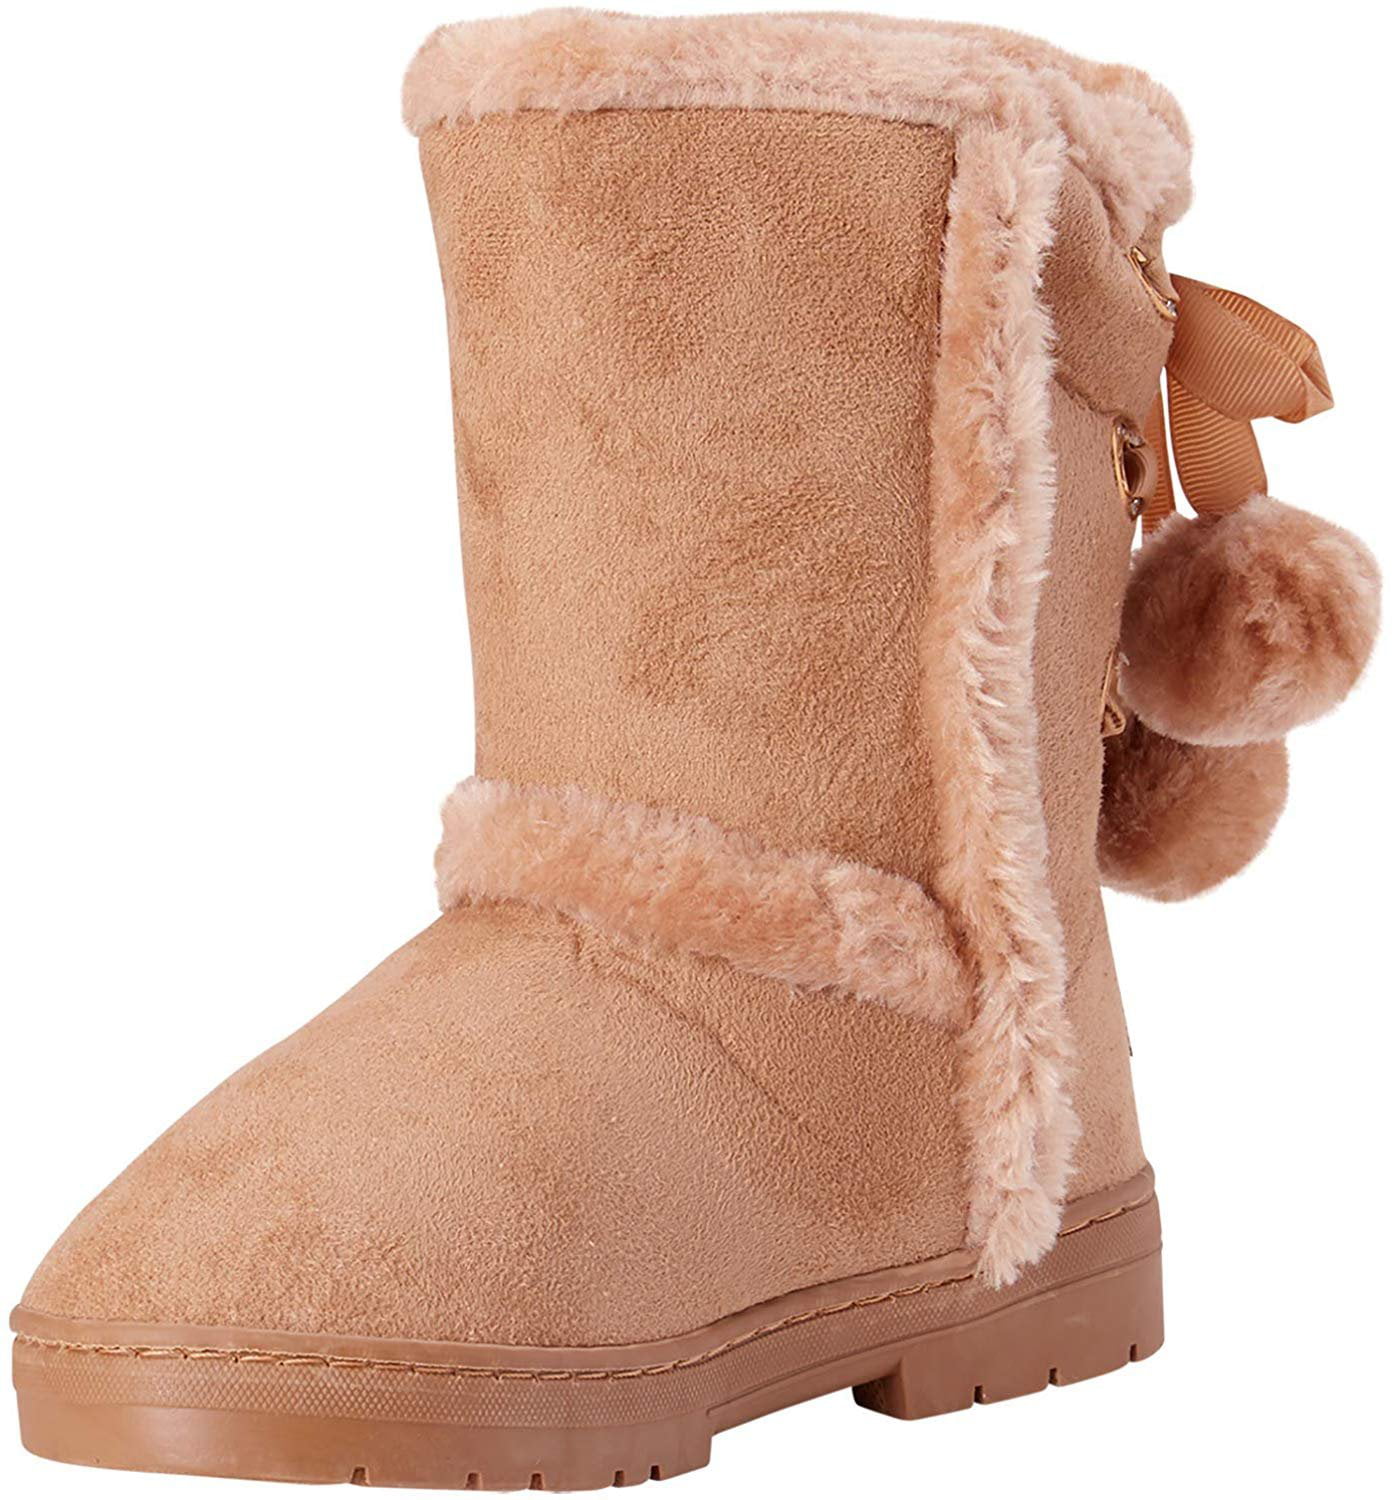 Brown Cute Faux Suede Pom Pom Casual Booties Toddlers Kids Girls Winter Boots 